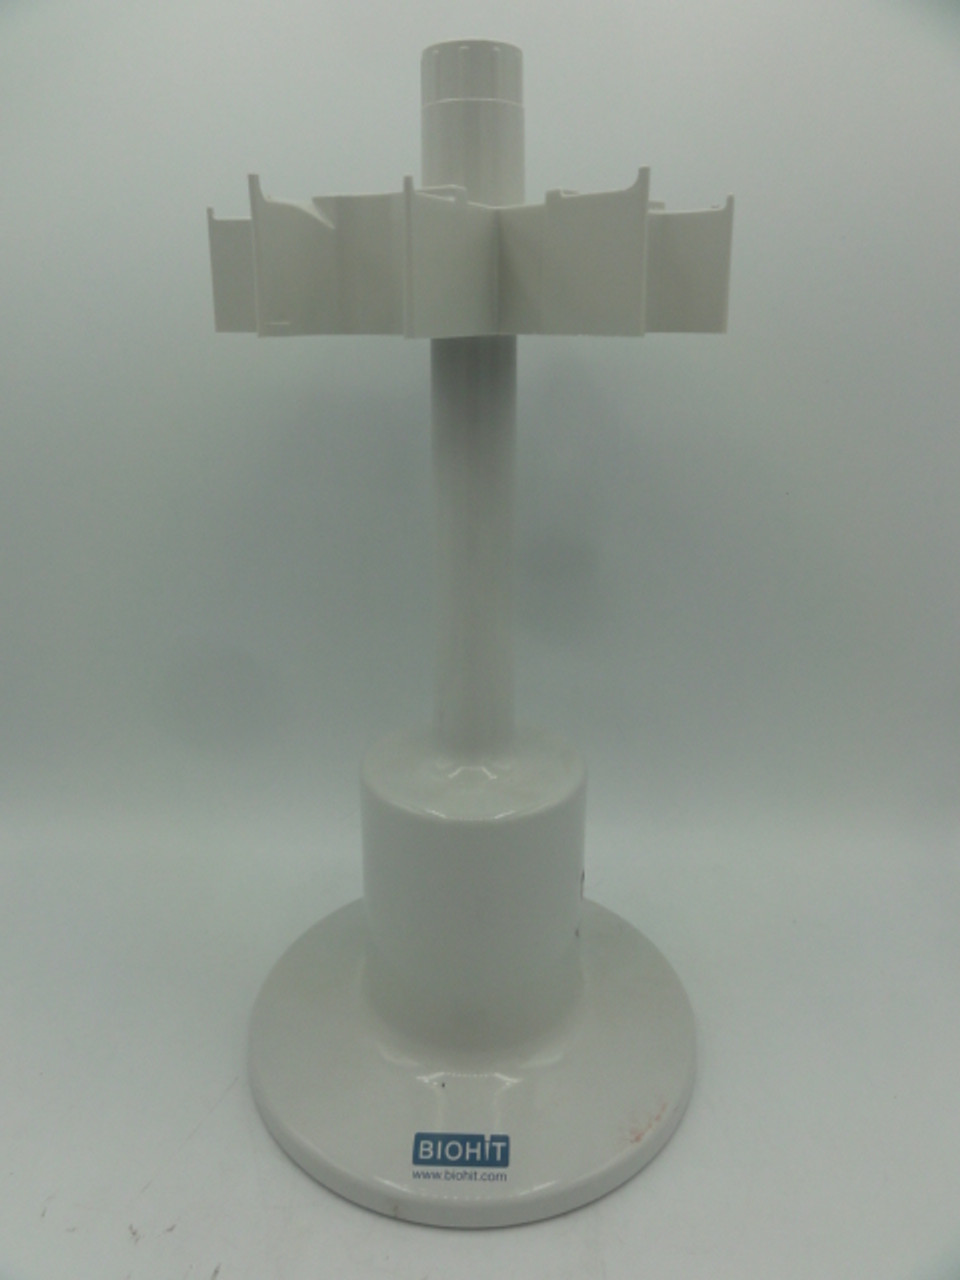 Biohit 5 Place Pipette Carousel Stand